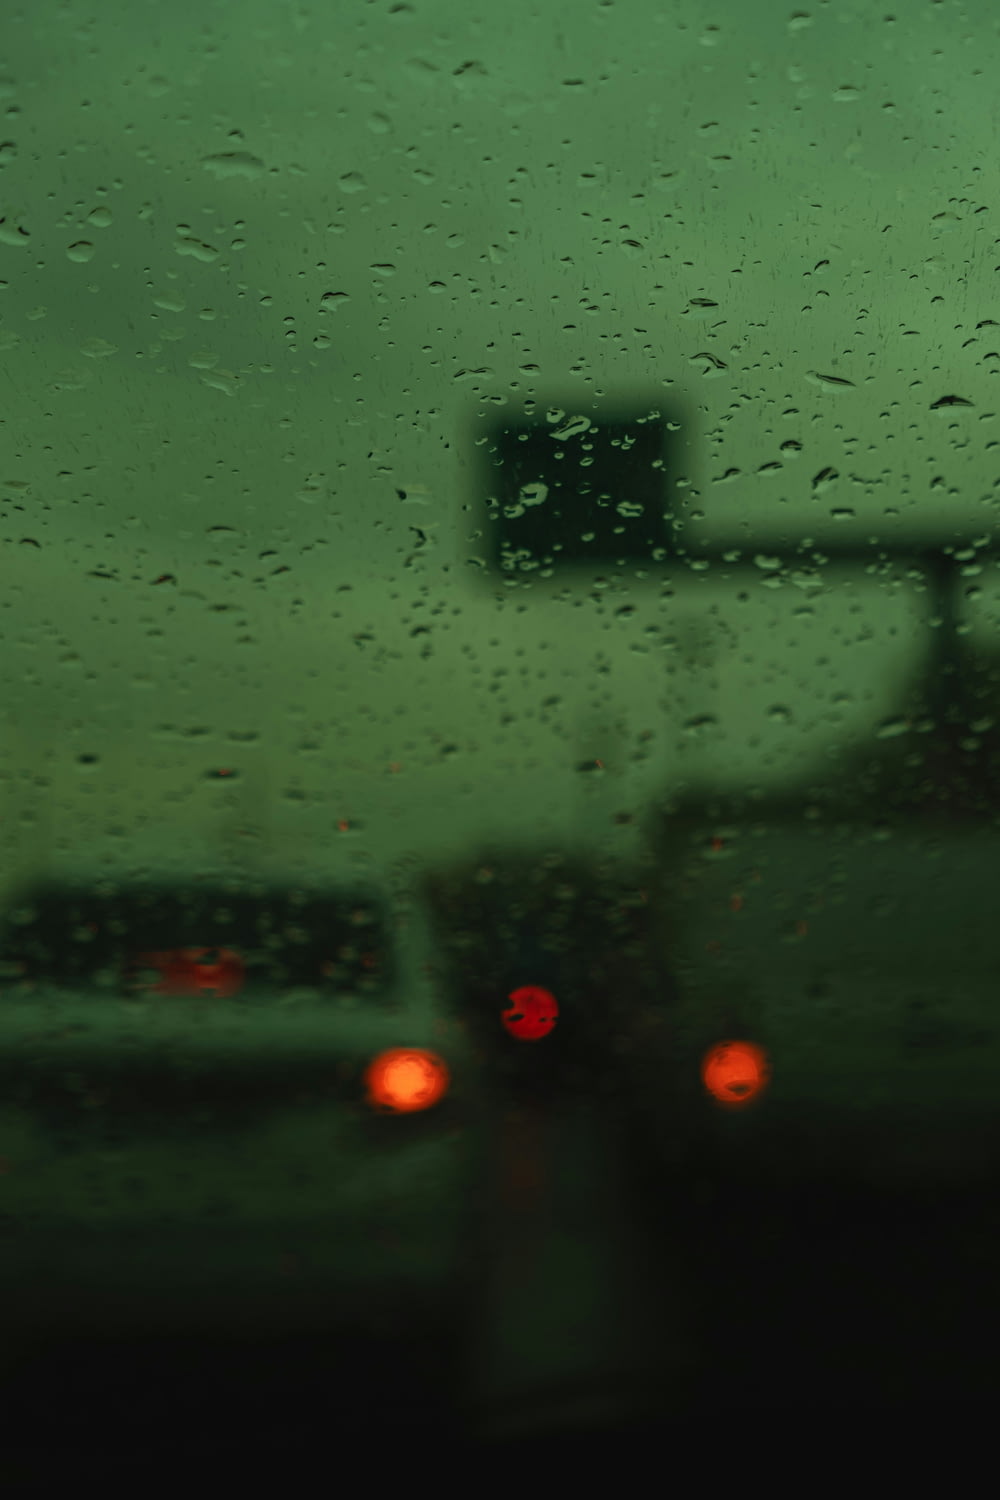 a view of traffic through a rain covered windshield